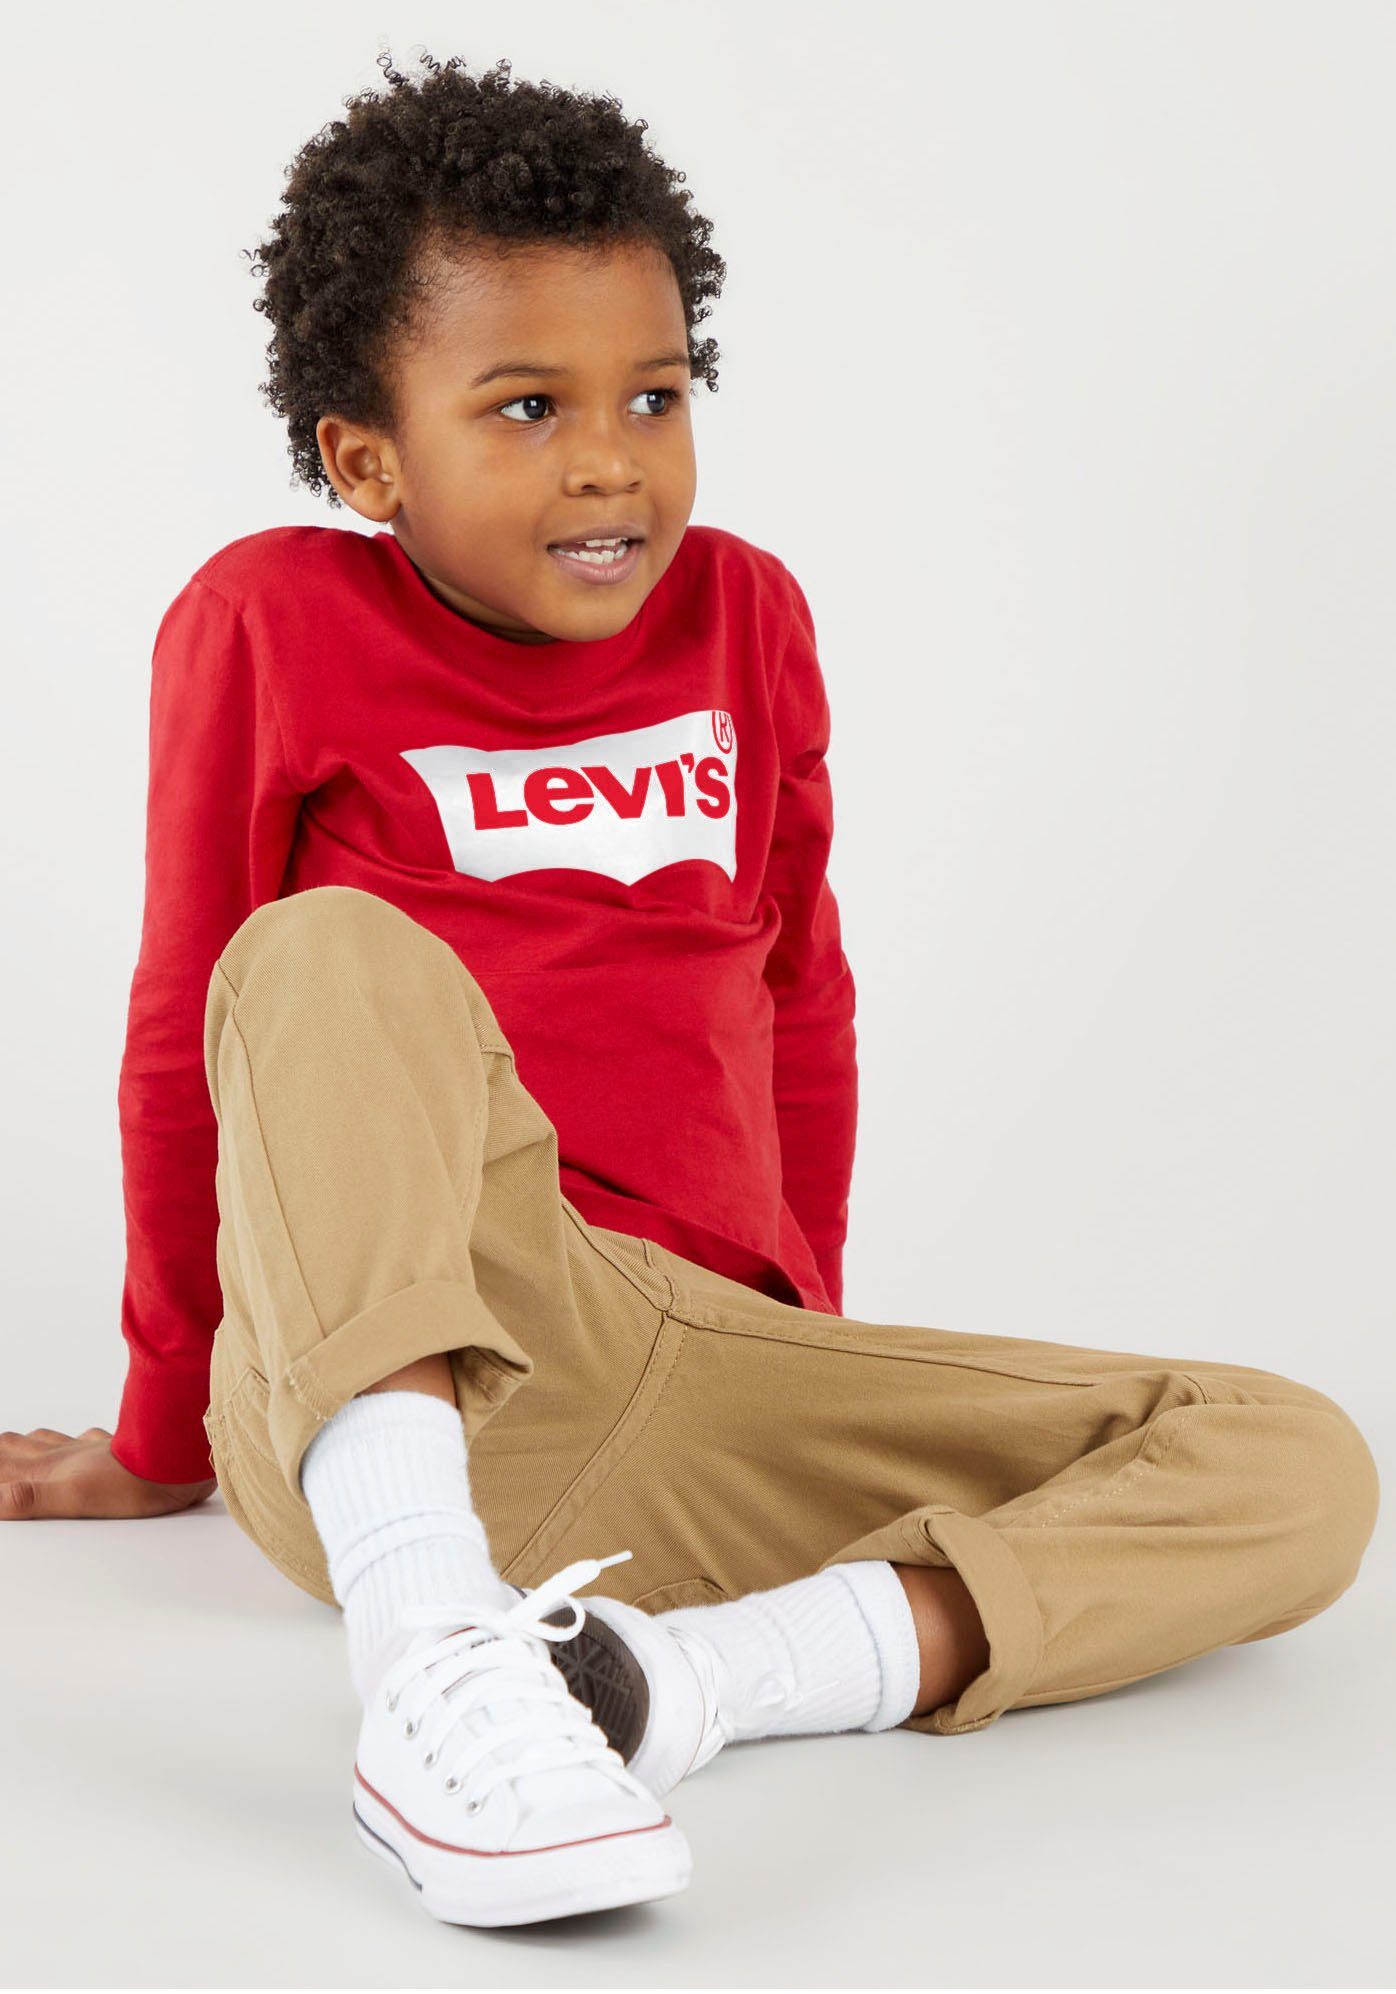 L/S Levi's® red Kids BOYS Langarmshirt TEE BATWING for